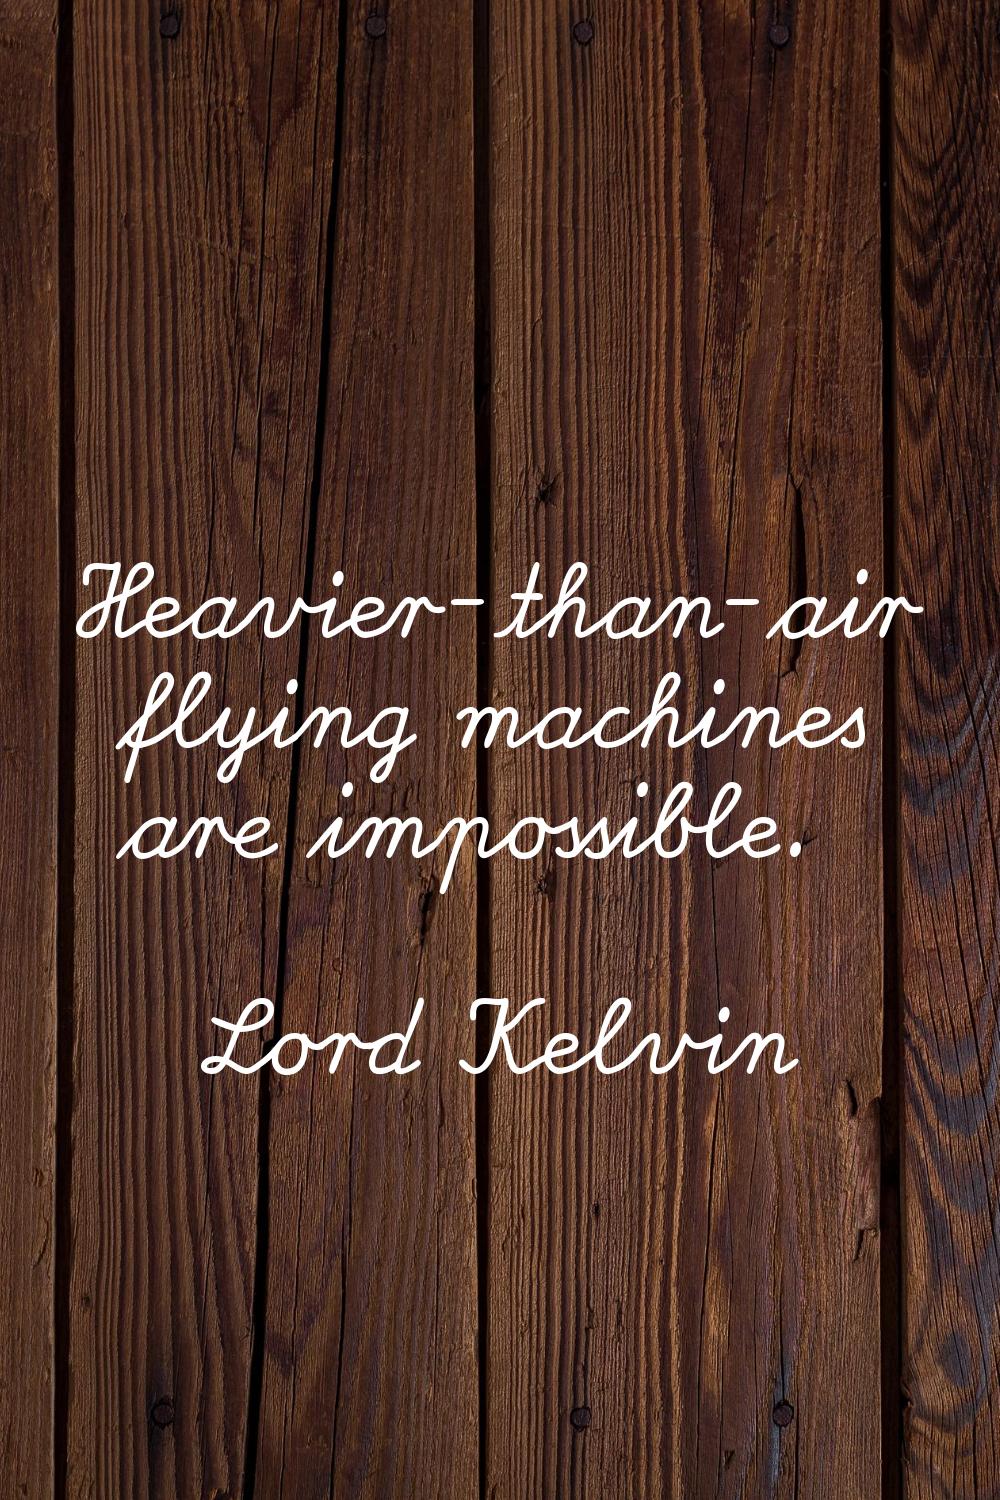 Heavier-than-air flying machines are impossible.